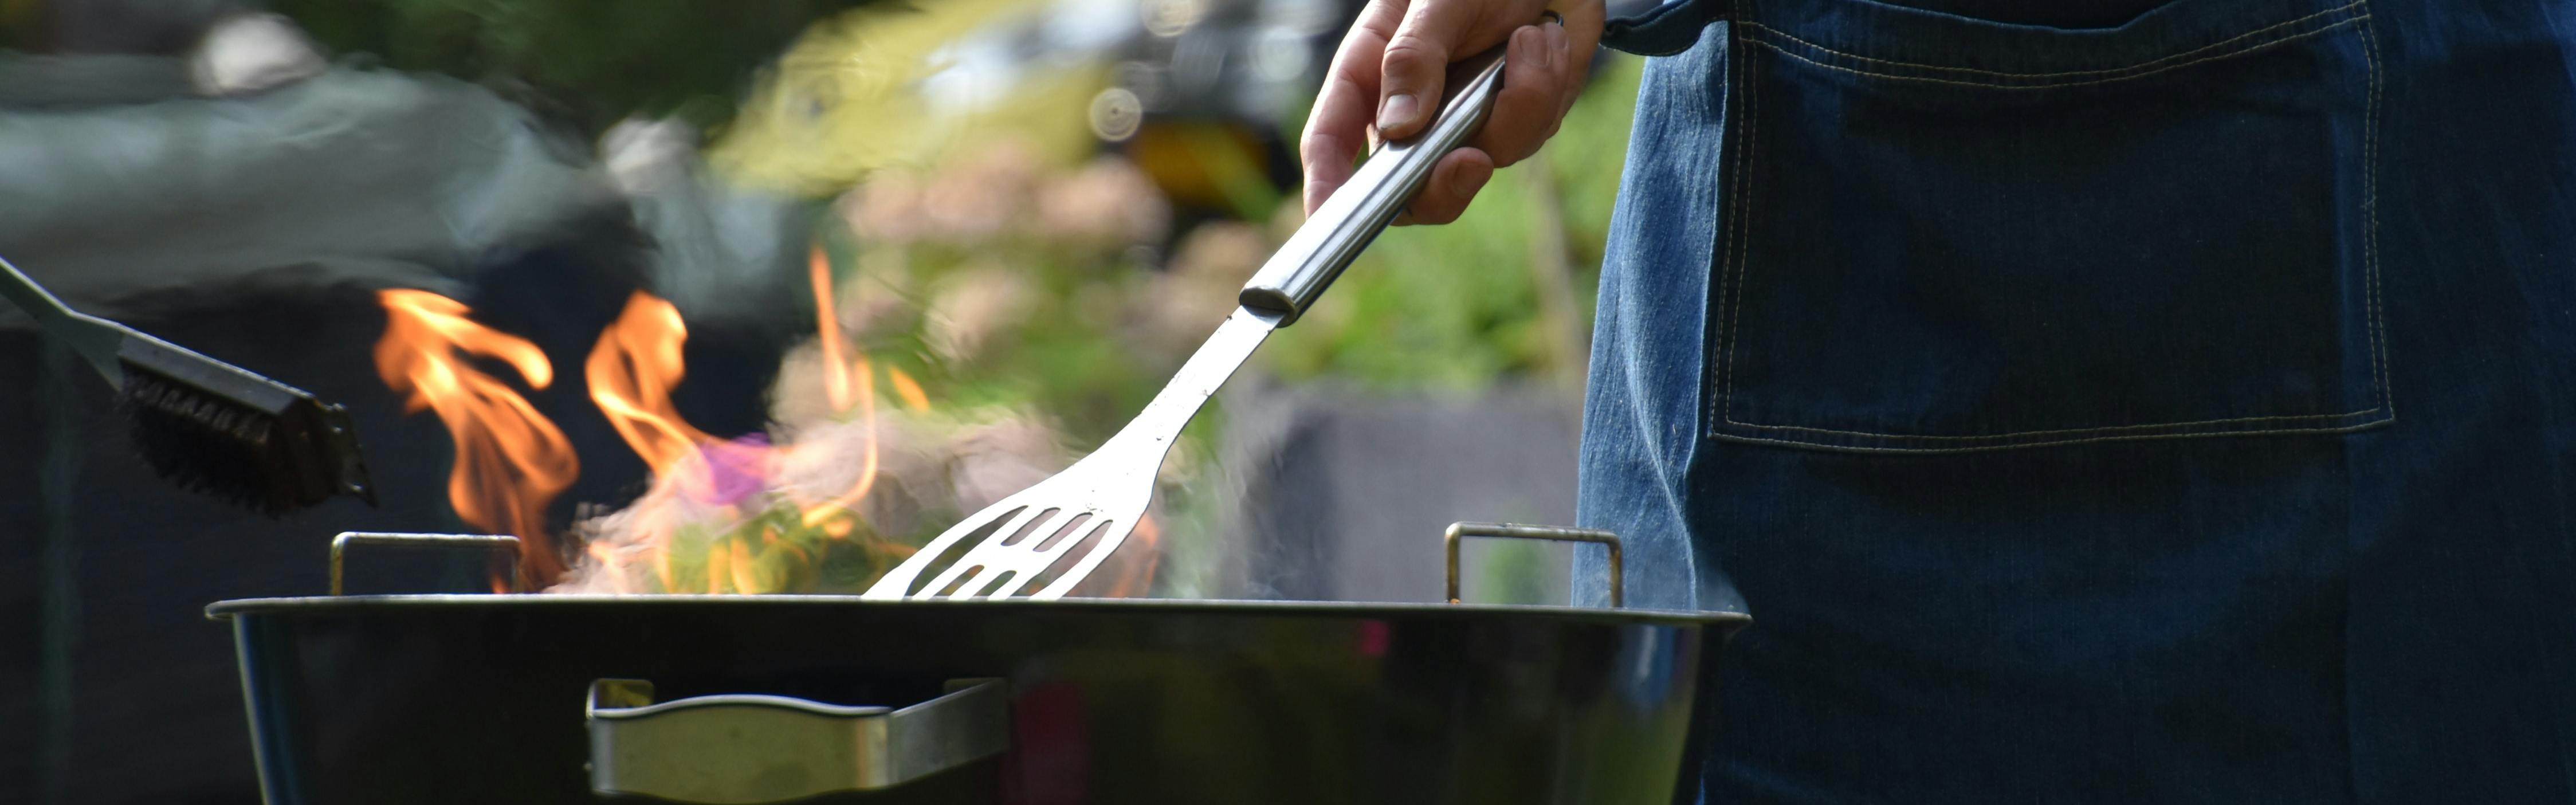 A man uses a spatula to flip a burger on a grill.